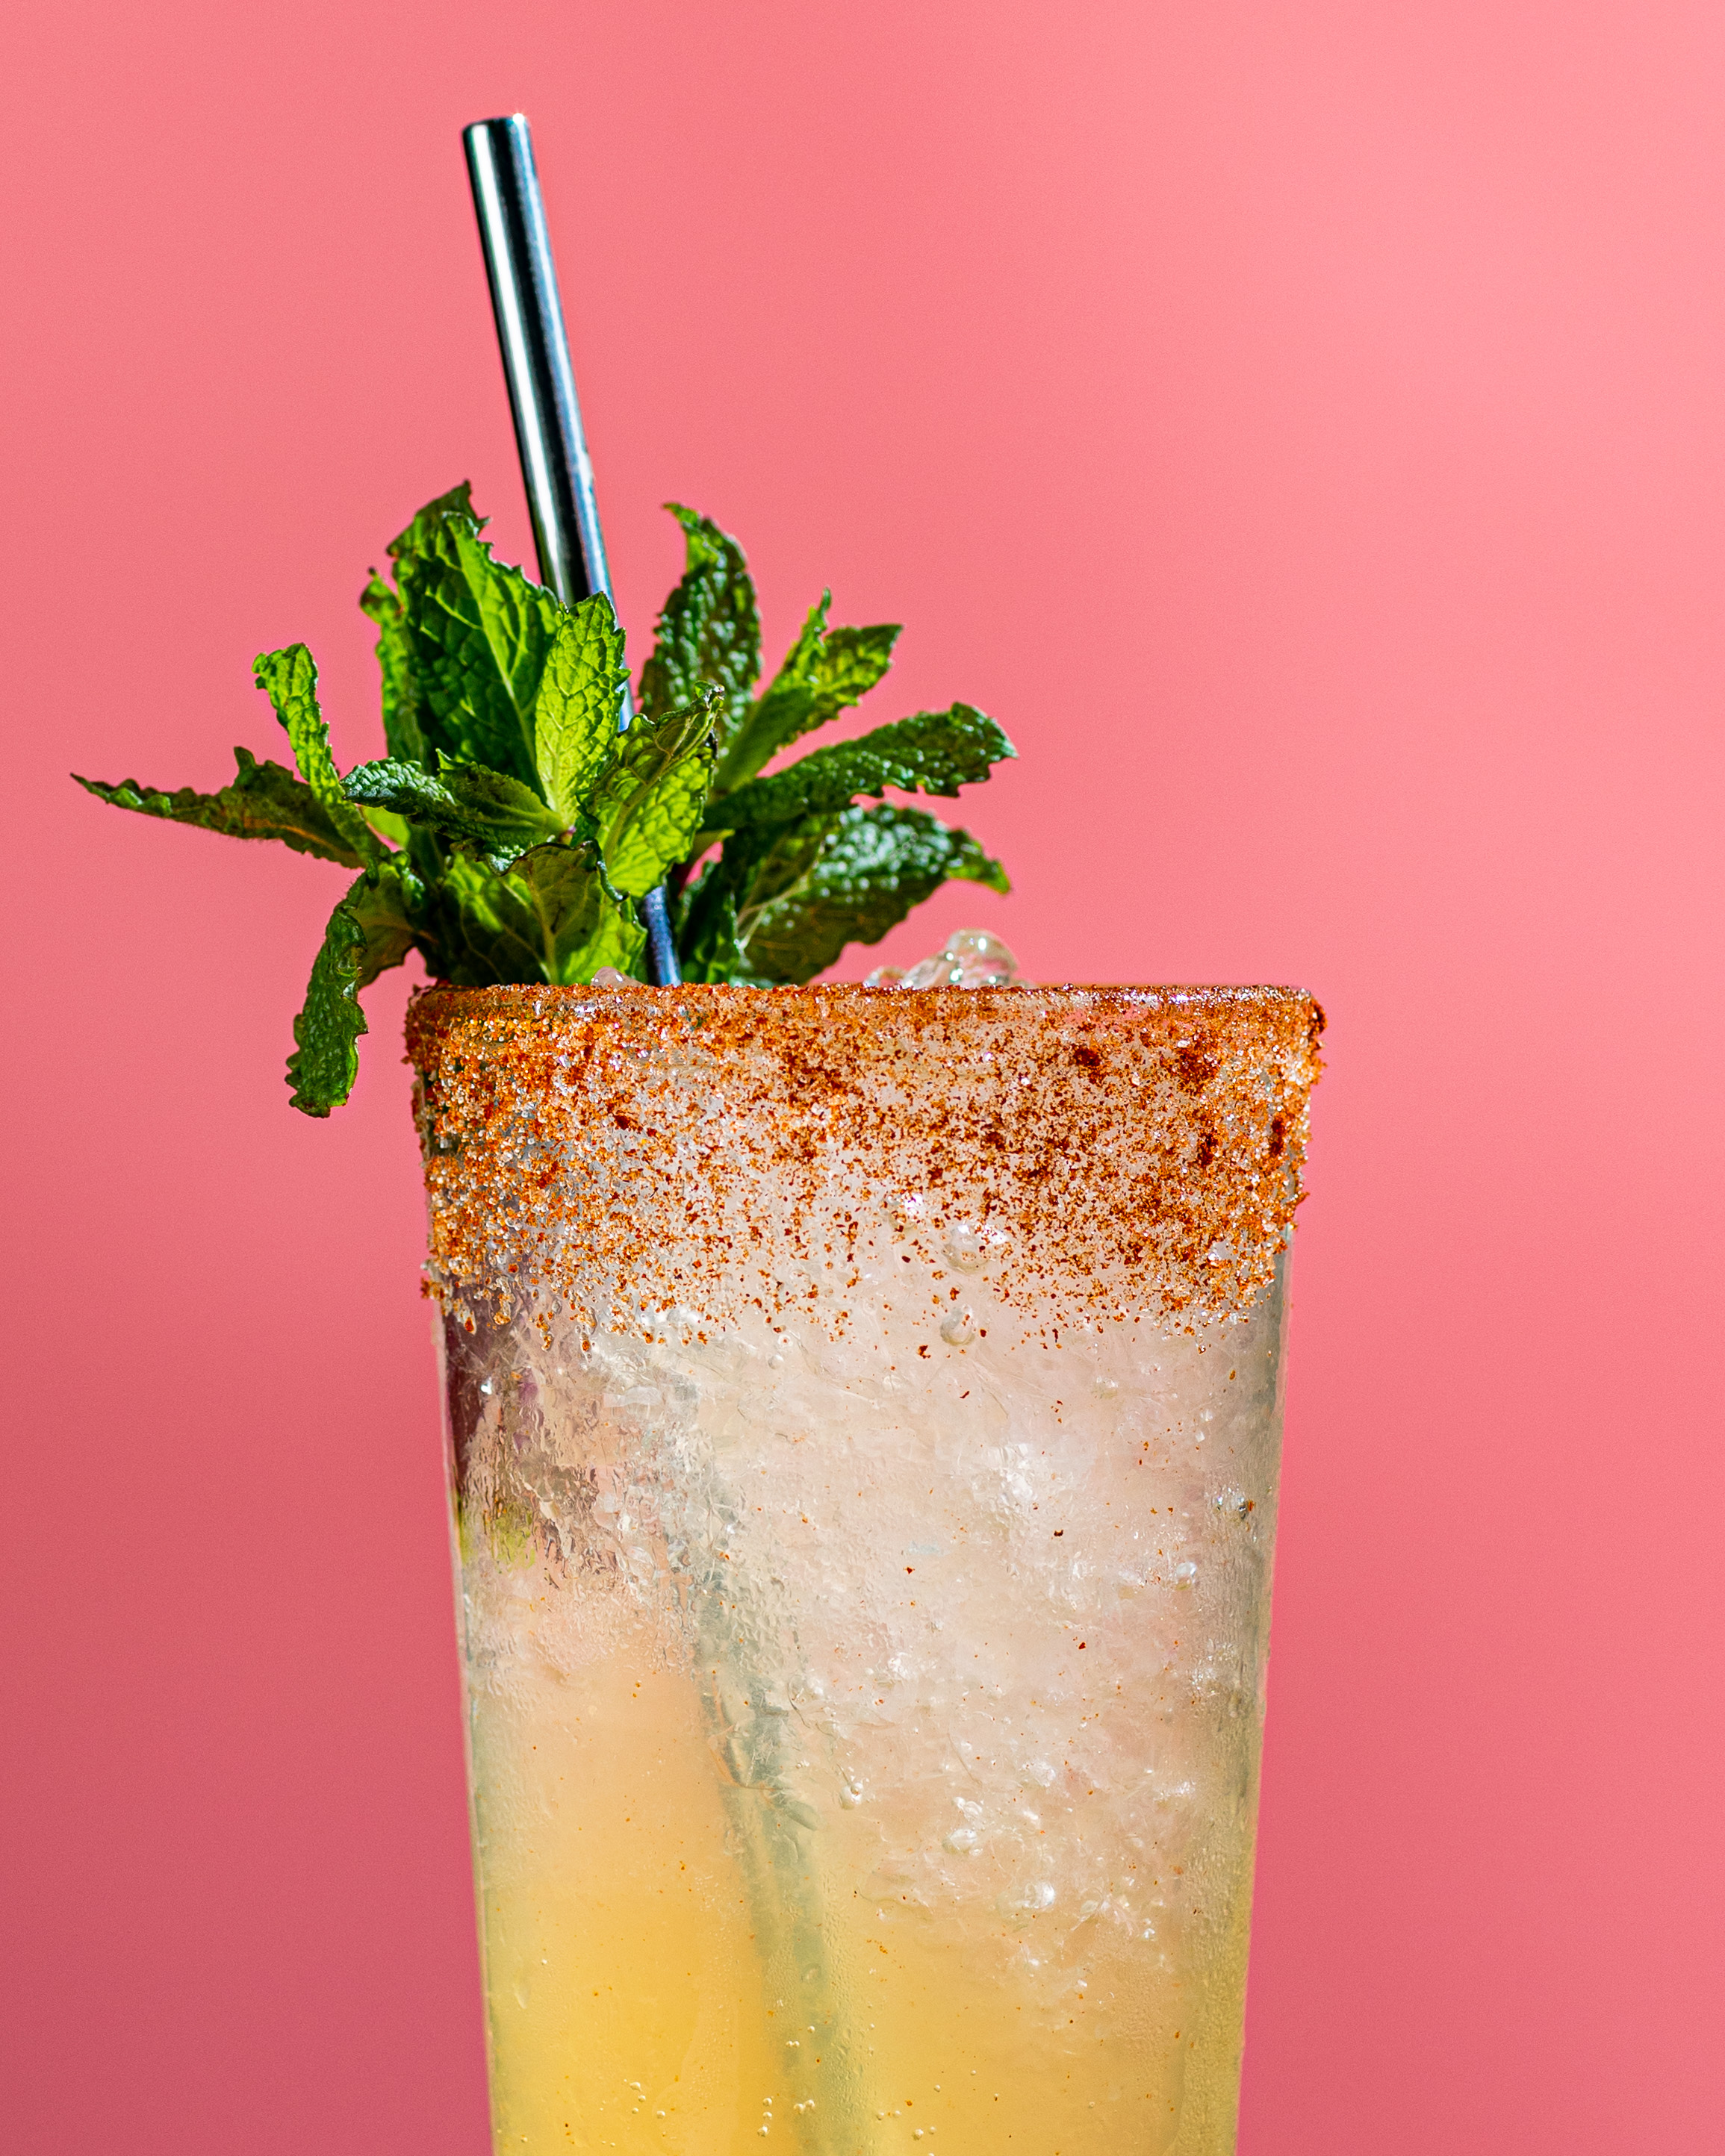 A yellow cocktail drink with a sprig of mint against a pink background.